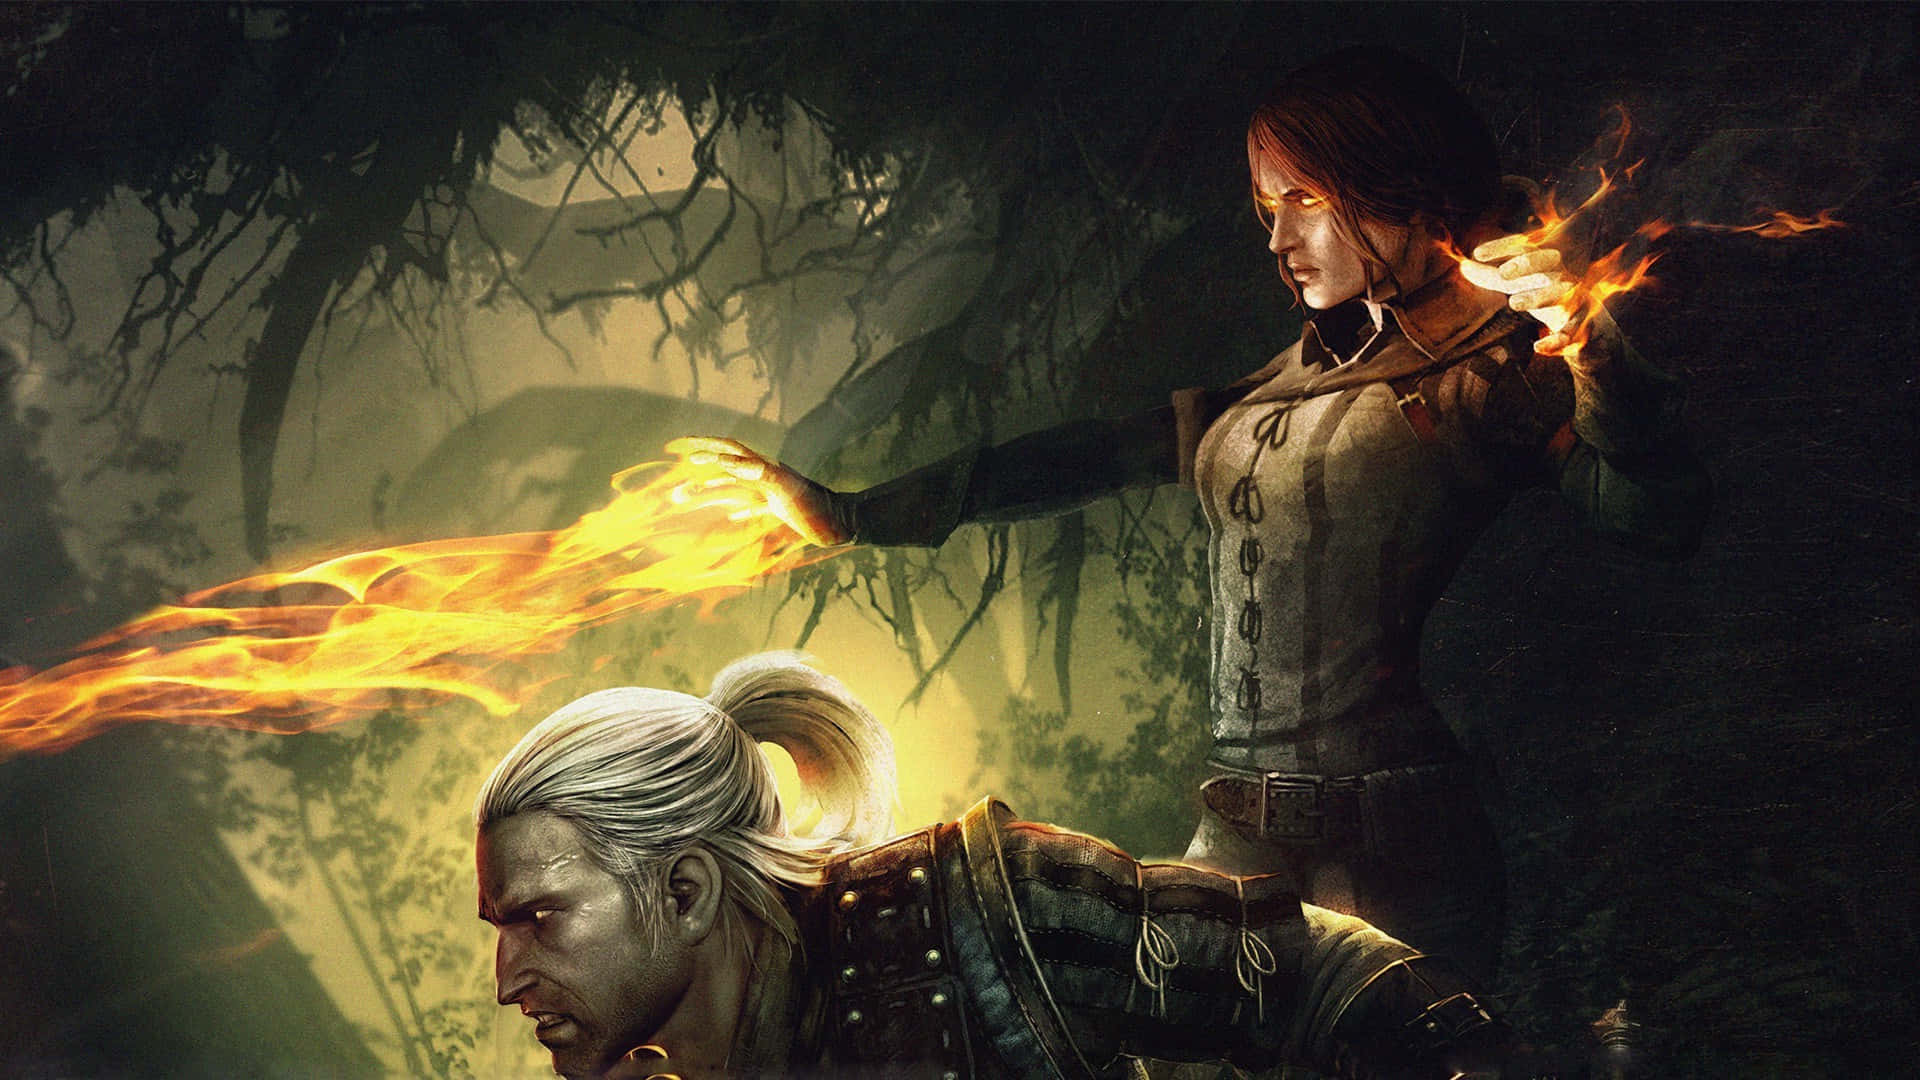 Geralt of Rivia, The Witcher, in action against the mysterious creatures in a dark forest.